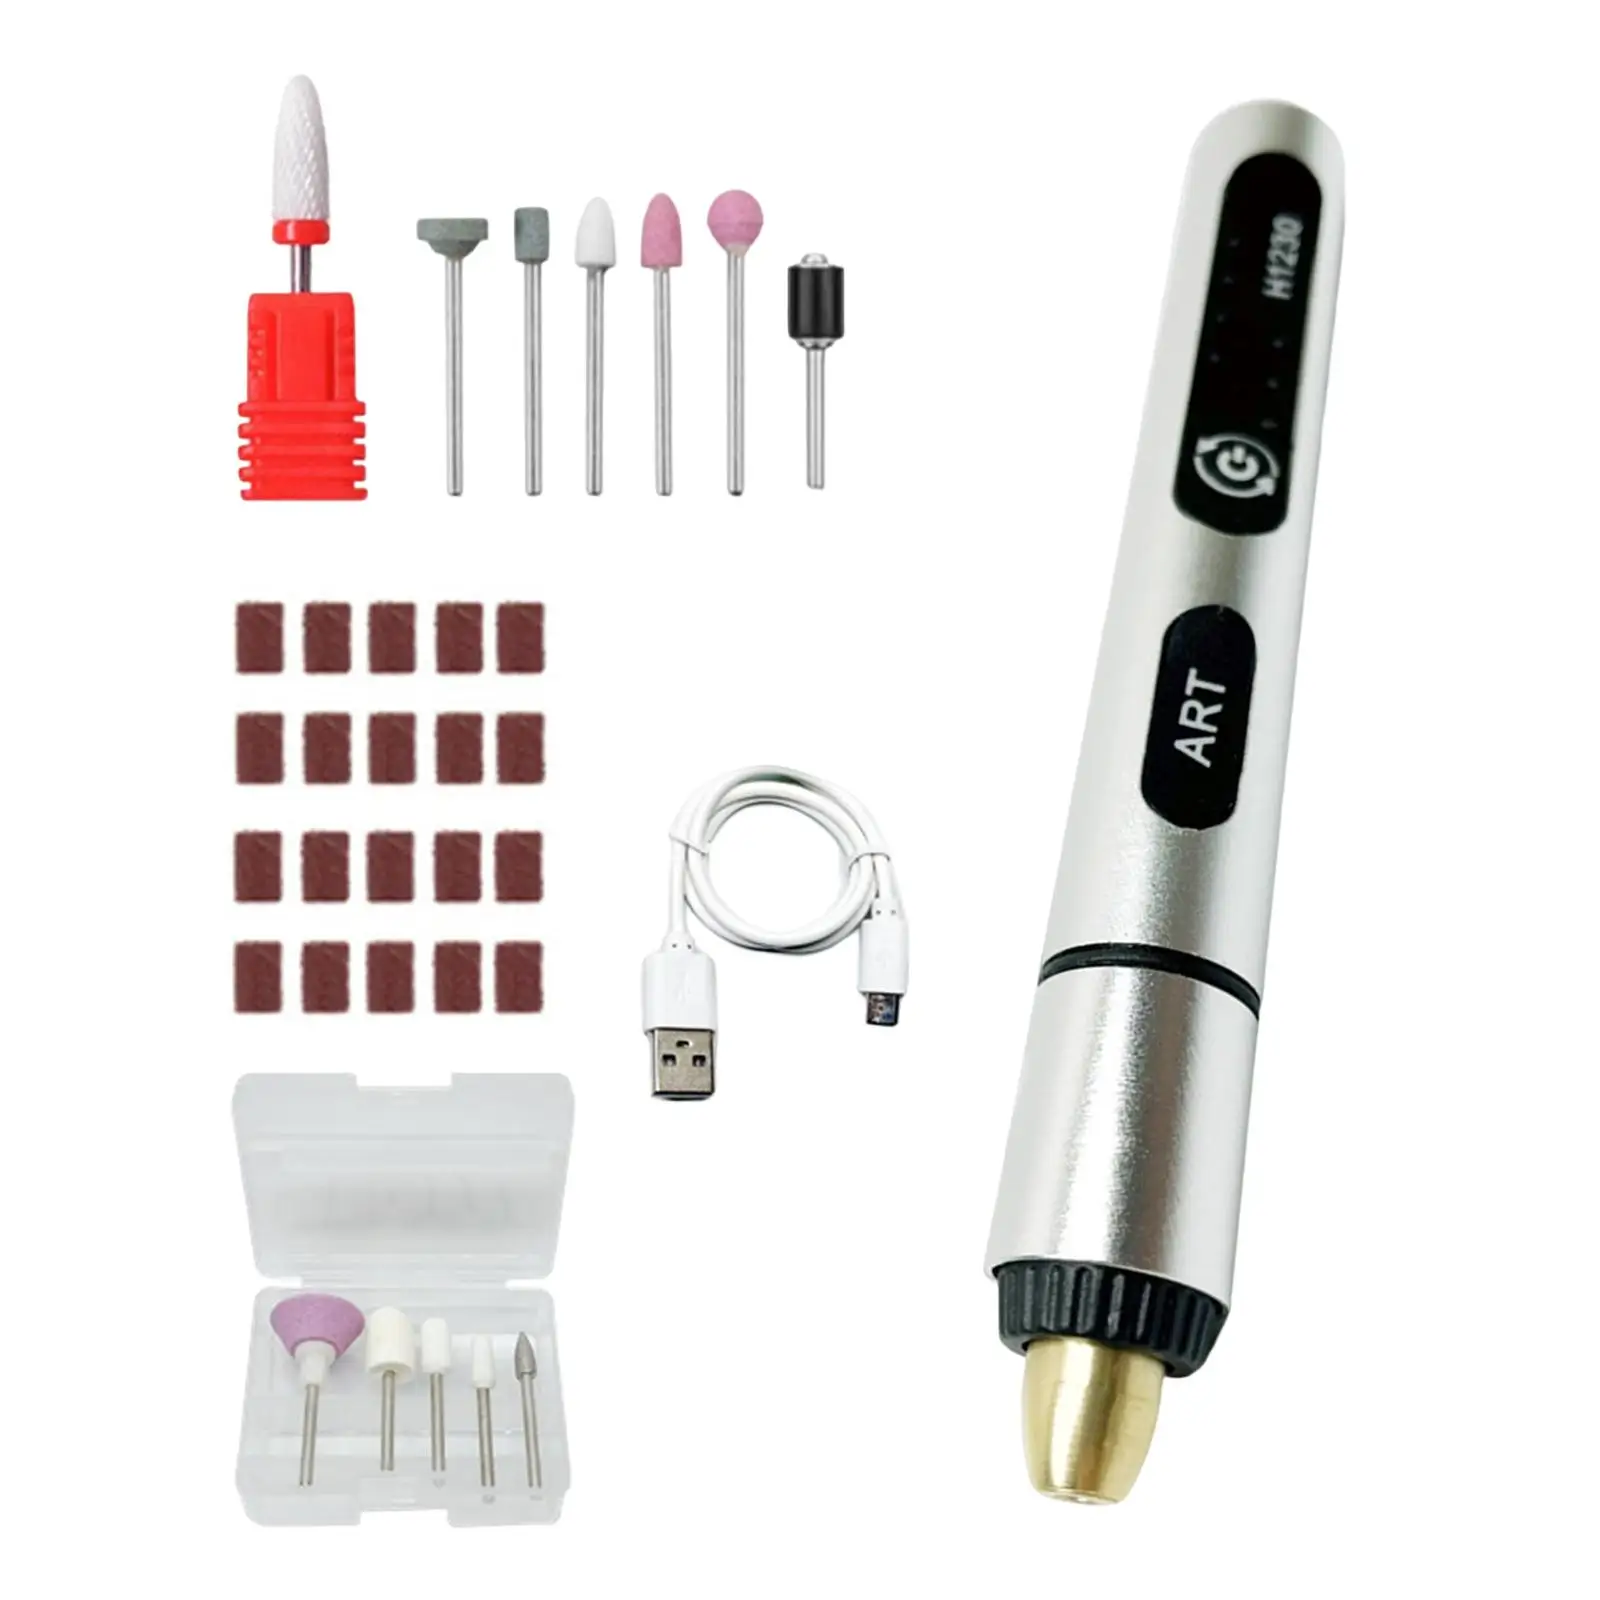 Electric Nail Drill Machine, USB Charging Manicure Pedicure Pen Sander Polisher for Wood